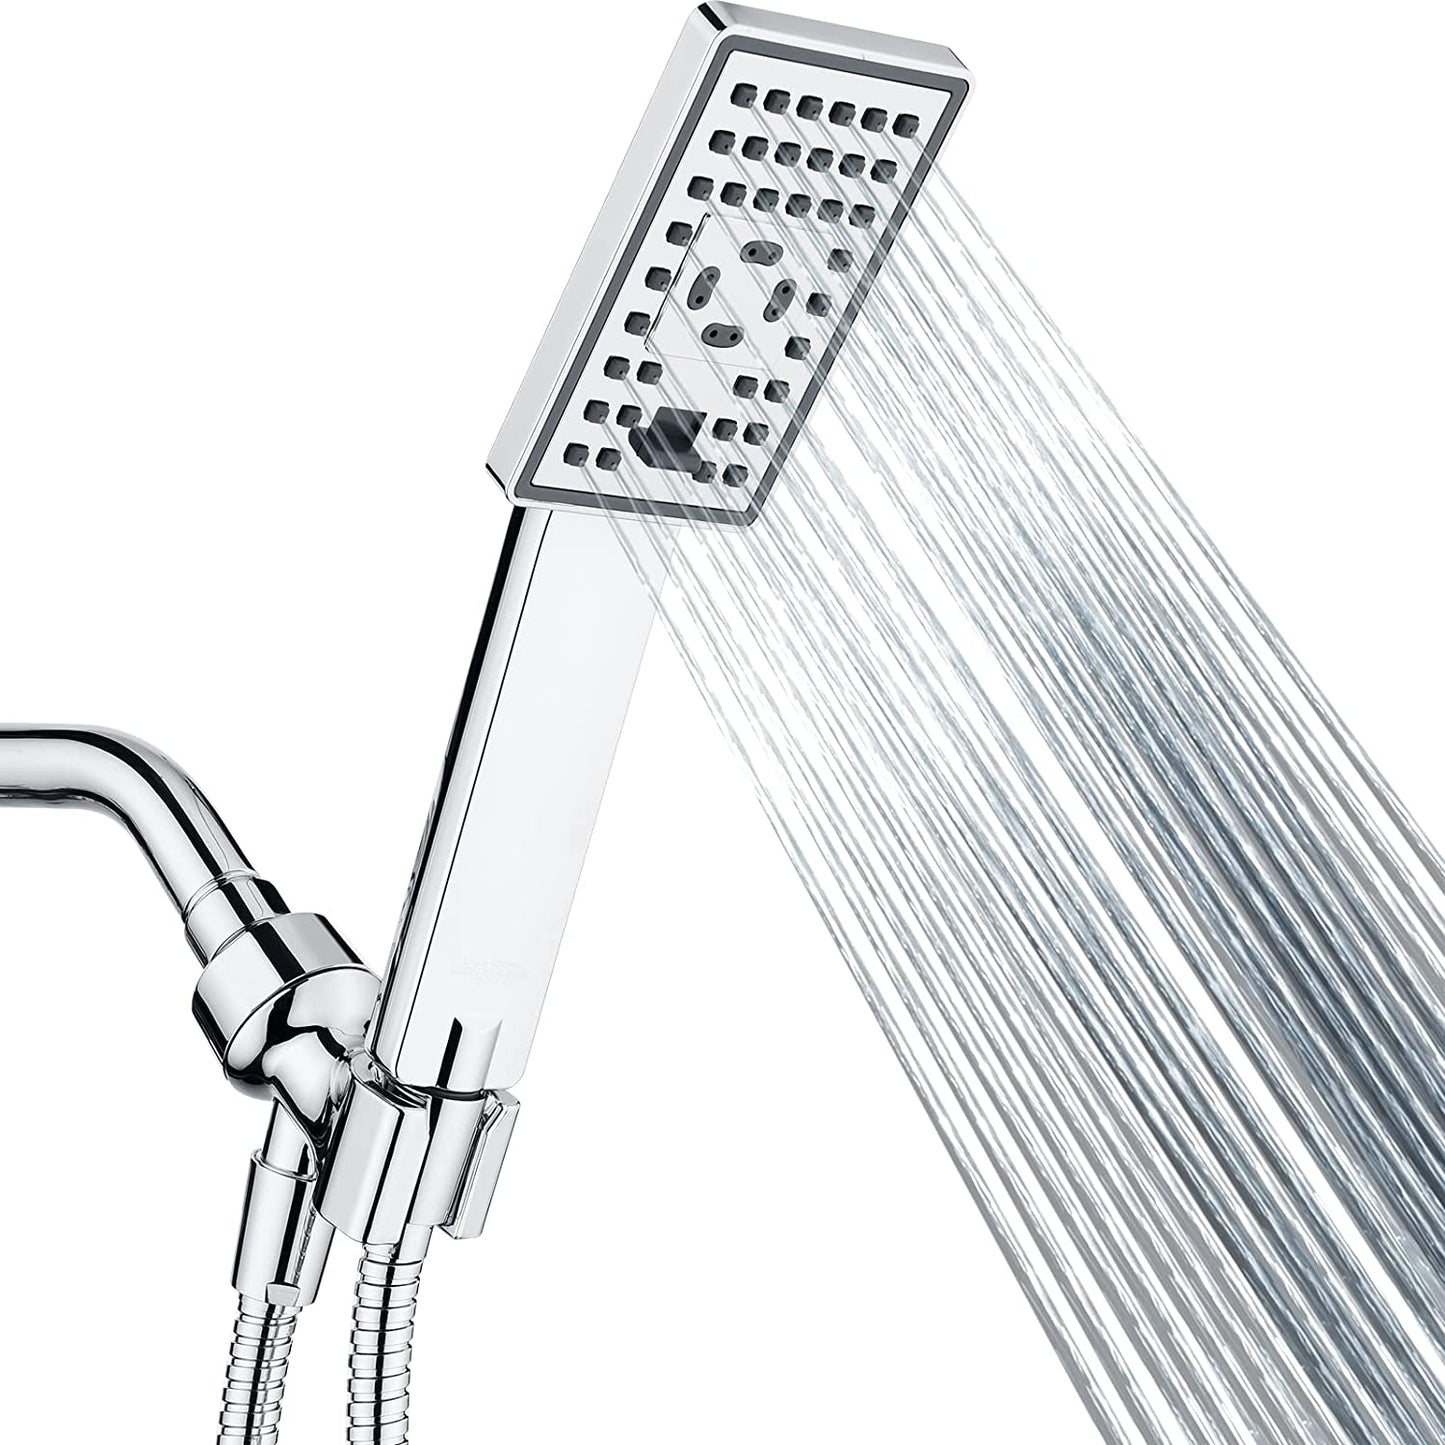 Buy the Grip Tight Tools SH303 Wh 3fct Handheld Shower